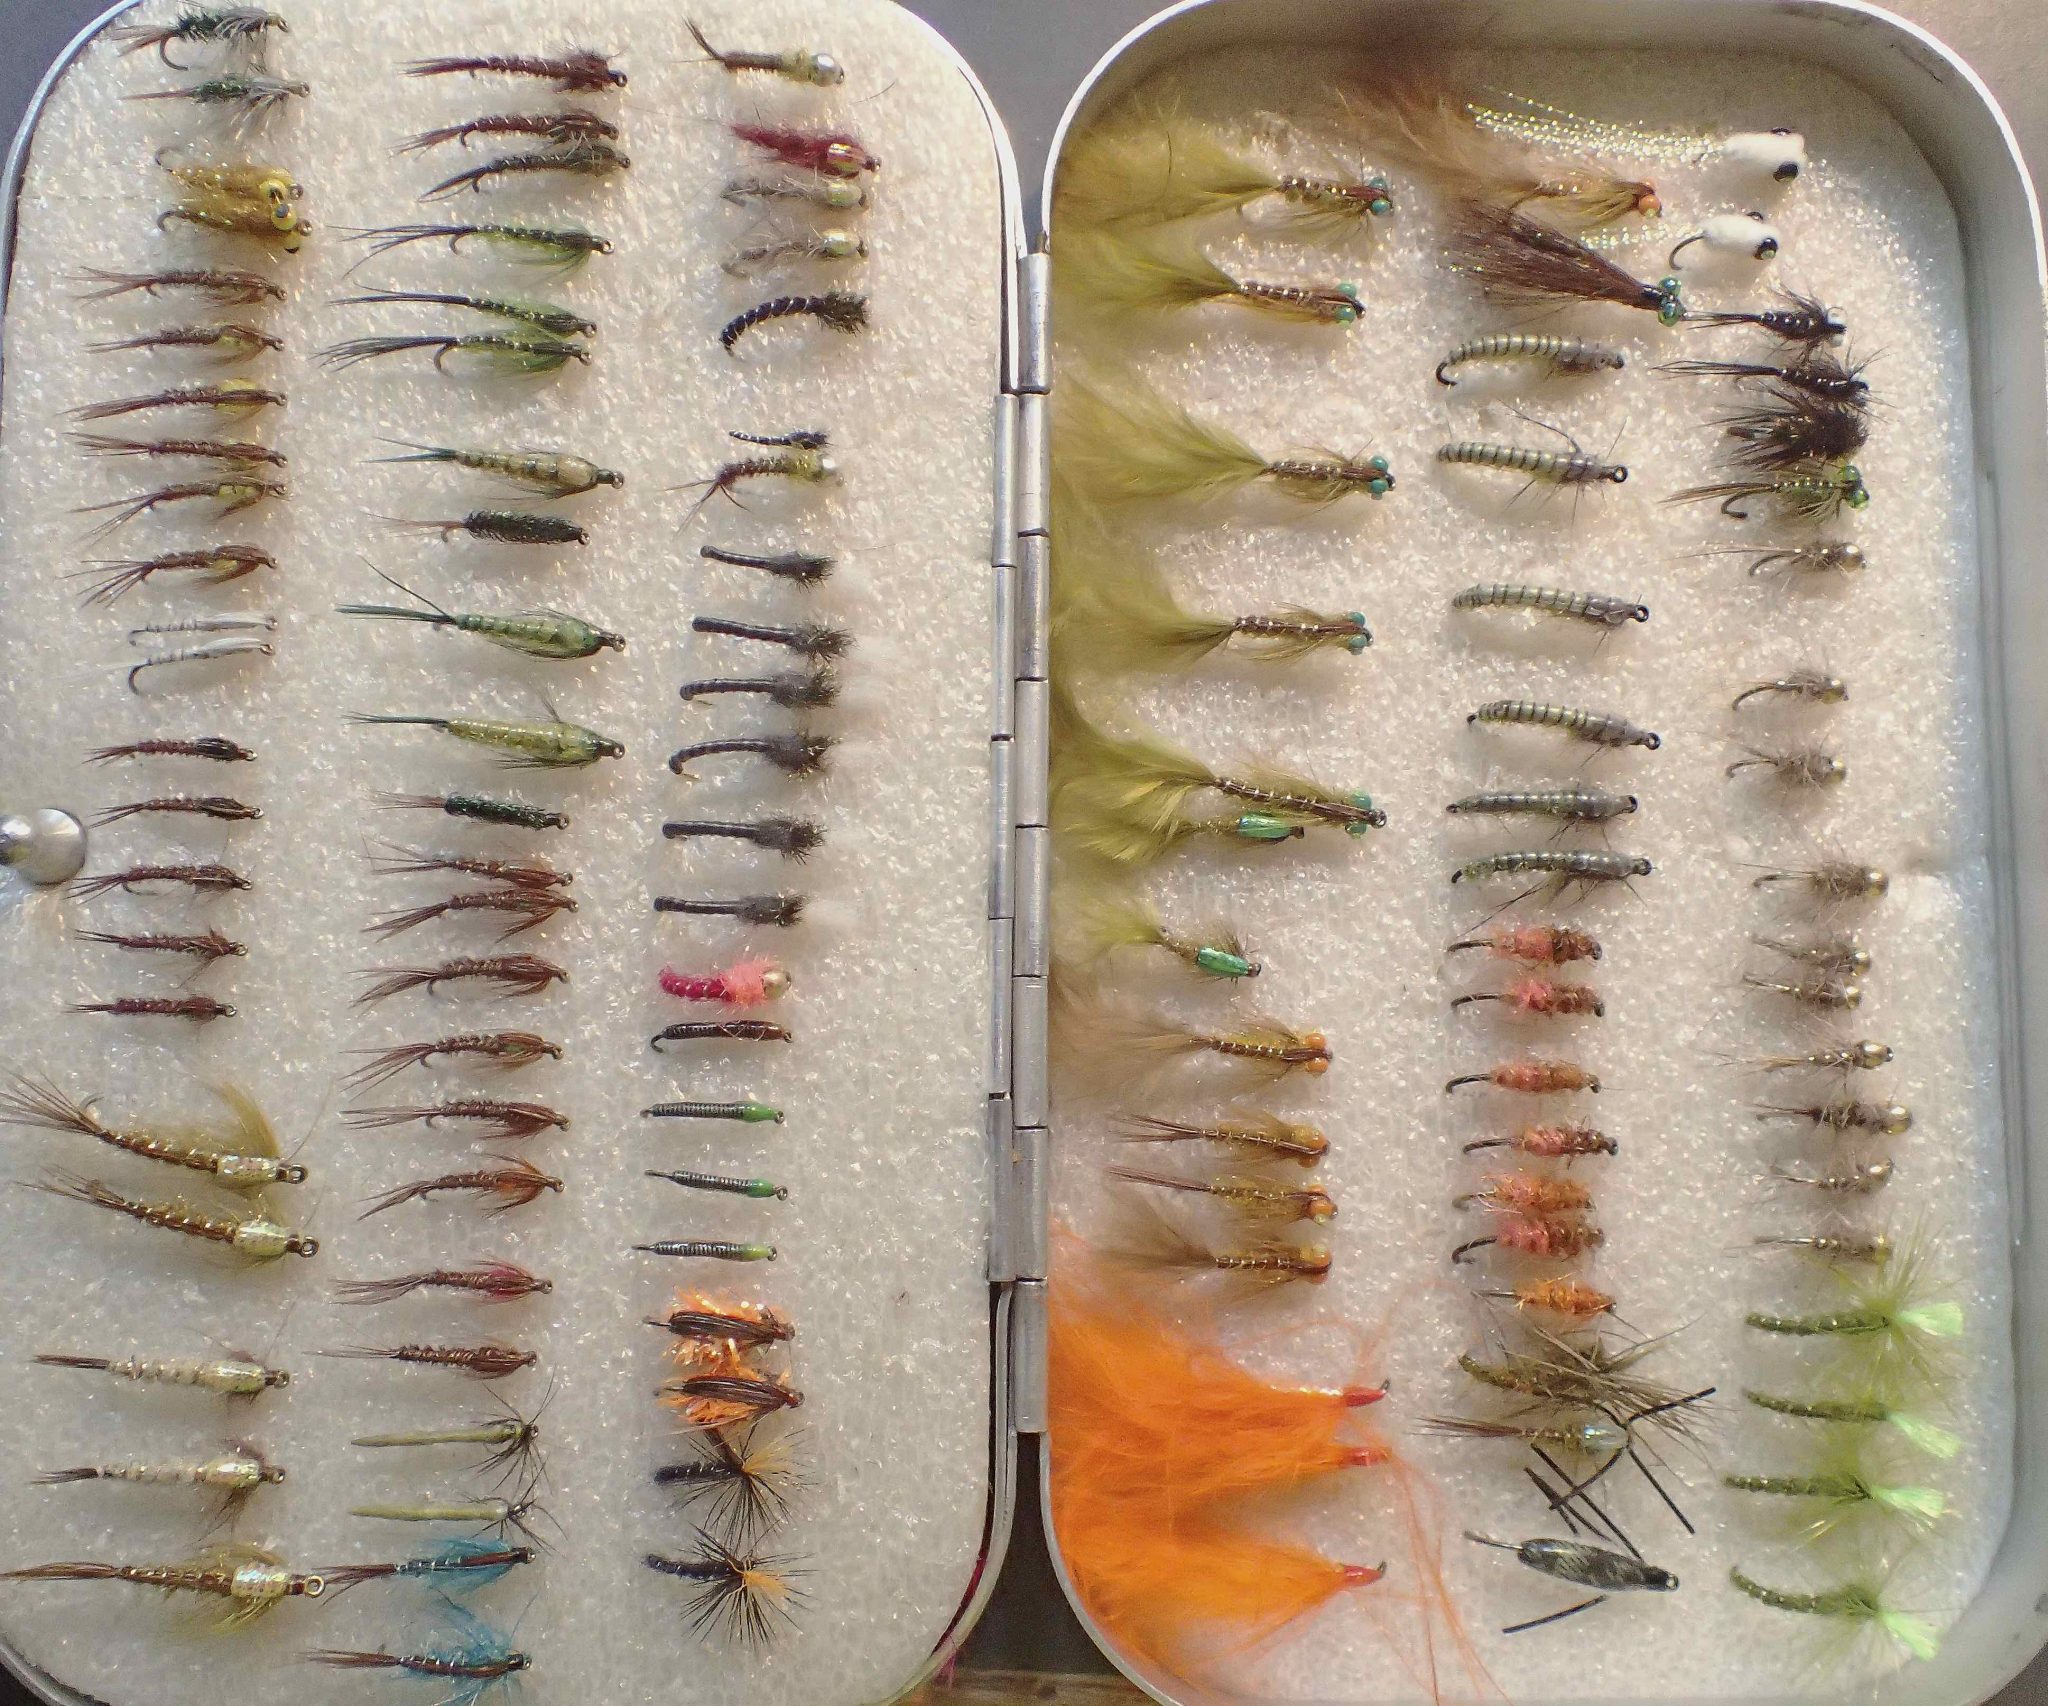 Seat trout flies for the sea